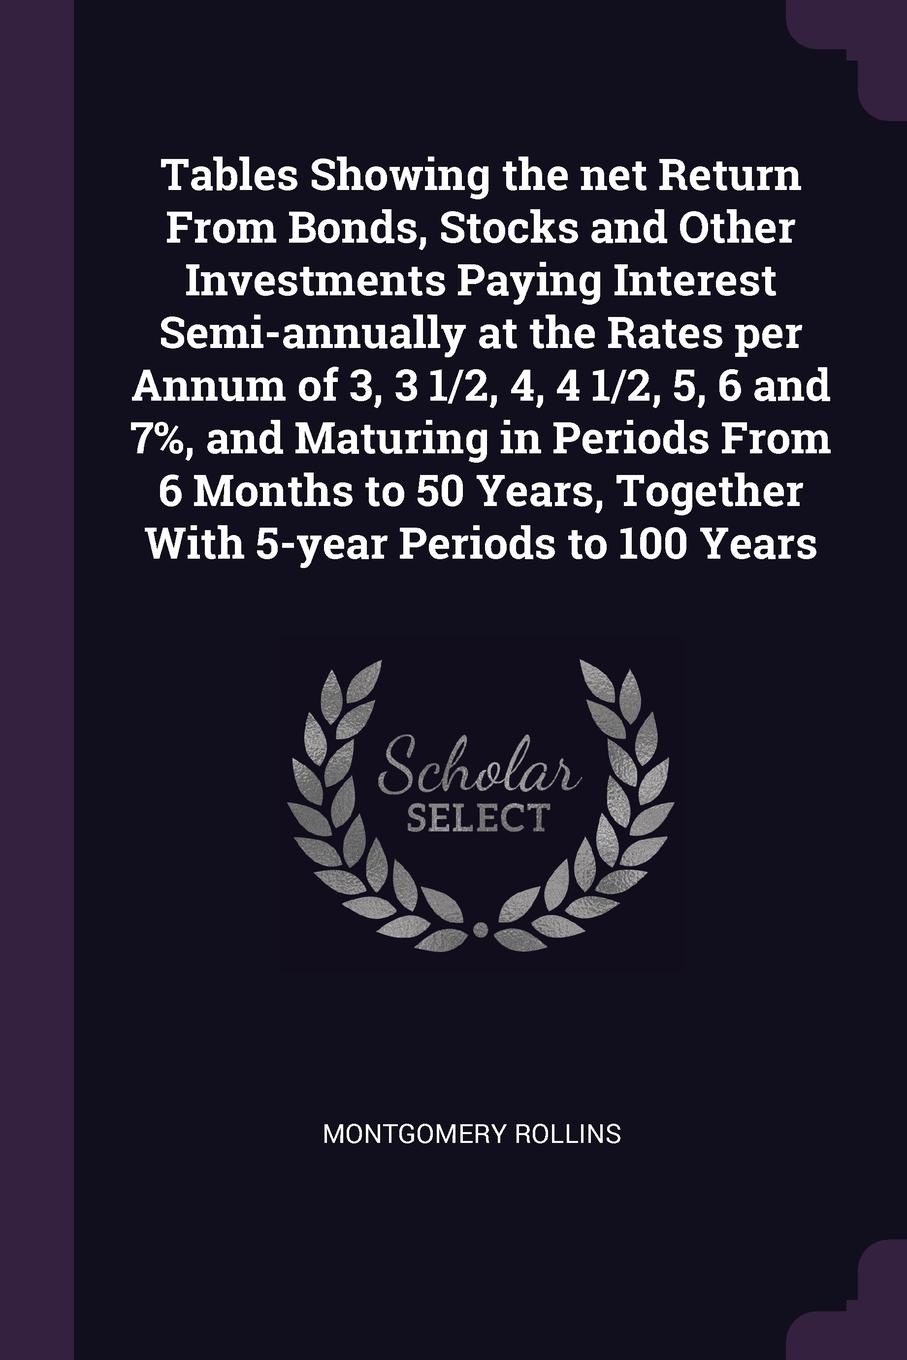 Tables Showing the net Return From Bonds, Stocks and Other Investments Paying Interest Semi-annually at the Rates per Annum of 3, 3 1/2, 4, 4 1/2, 5, 6 and 7%, and Maturing in Periods From 6 Months to 50 Years, Together With 5-year Periods to 100 ...